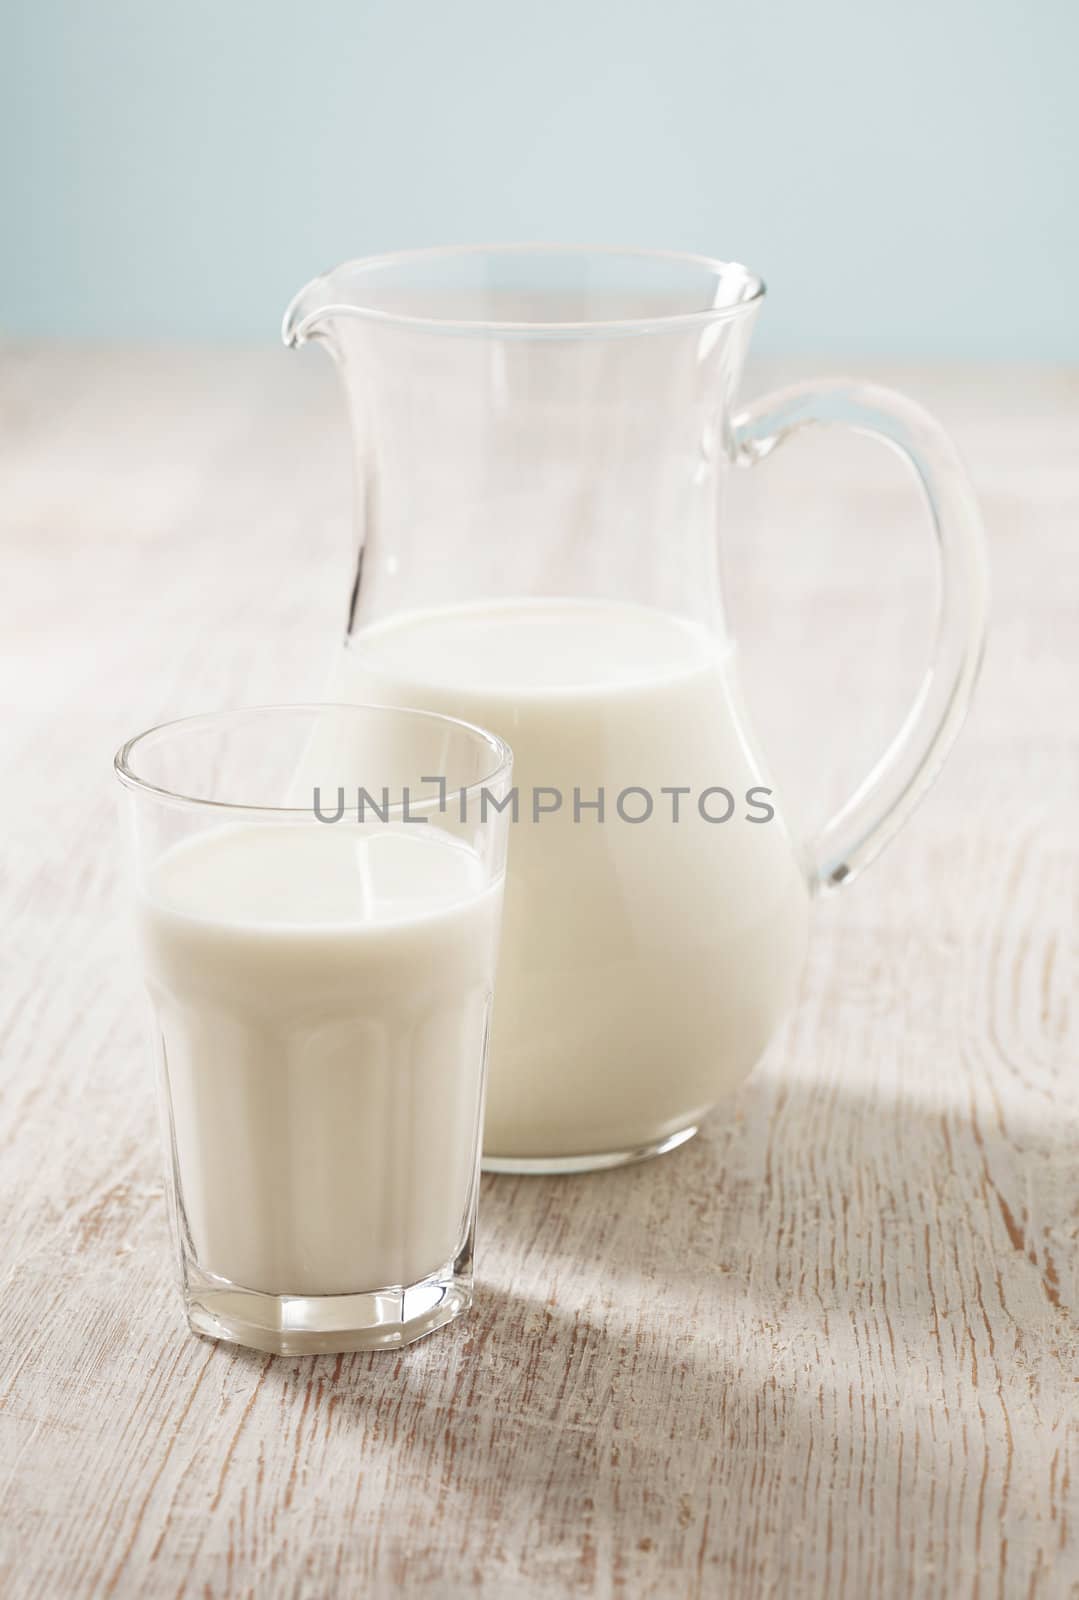 Milk in a pitcher and in a glass. Short depth of field: sharpness is in the glass